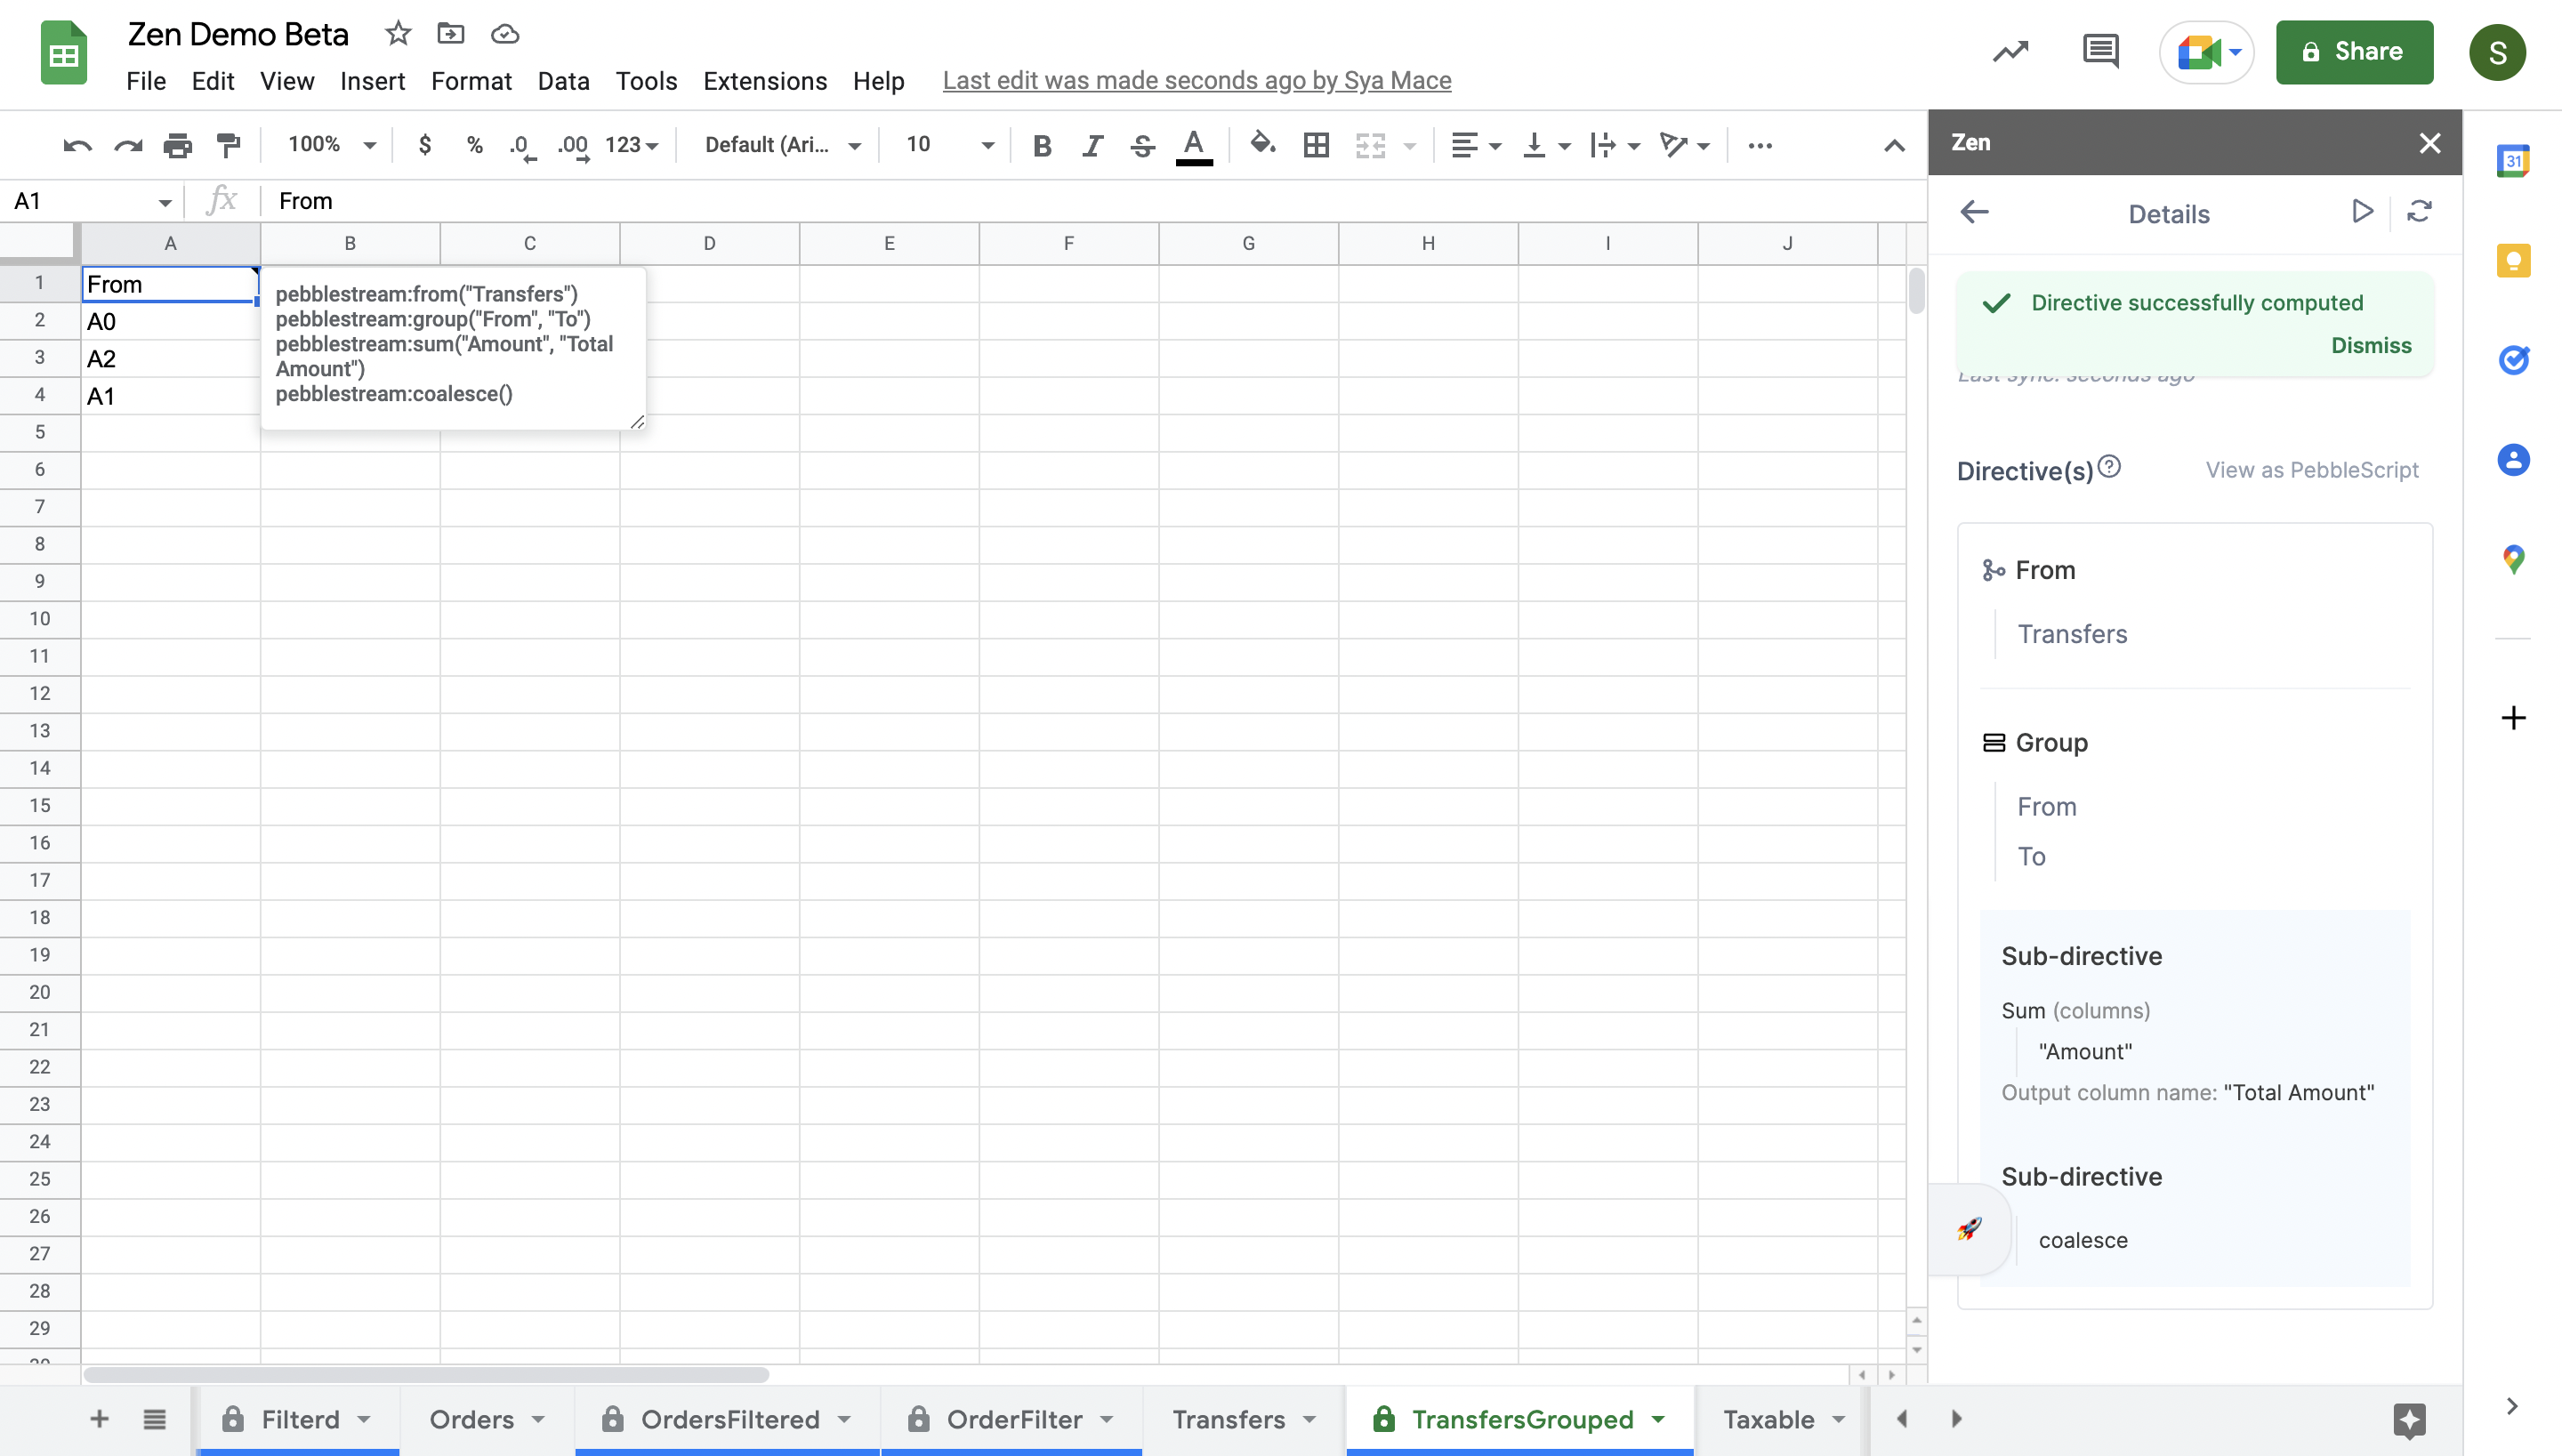 What it'll look like on the spreadsheet